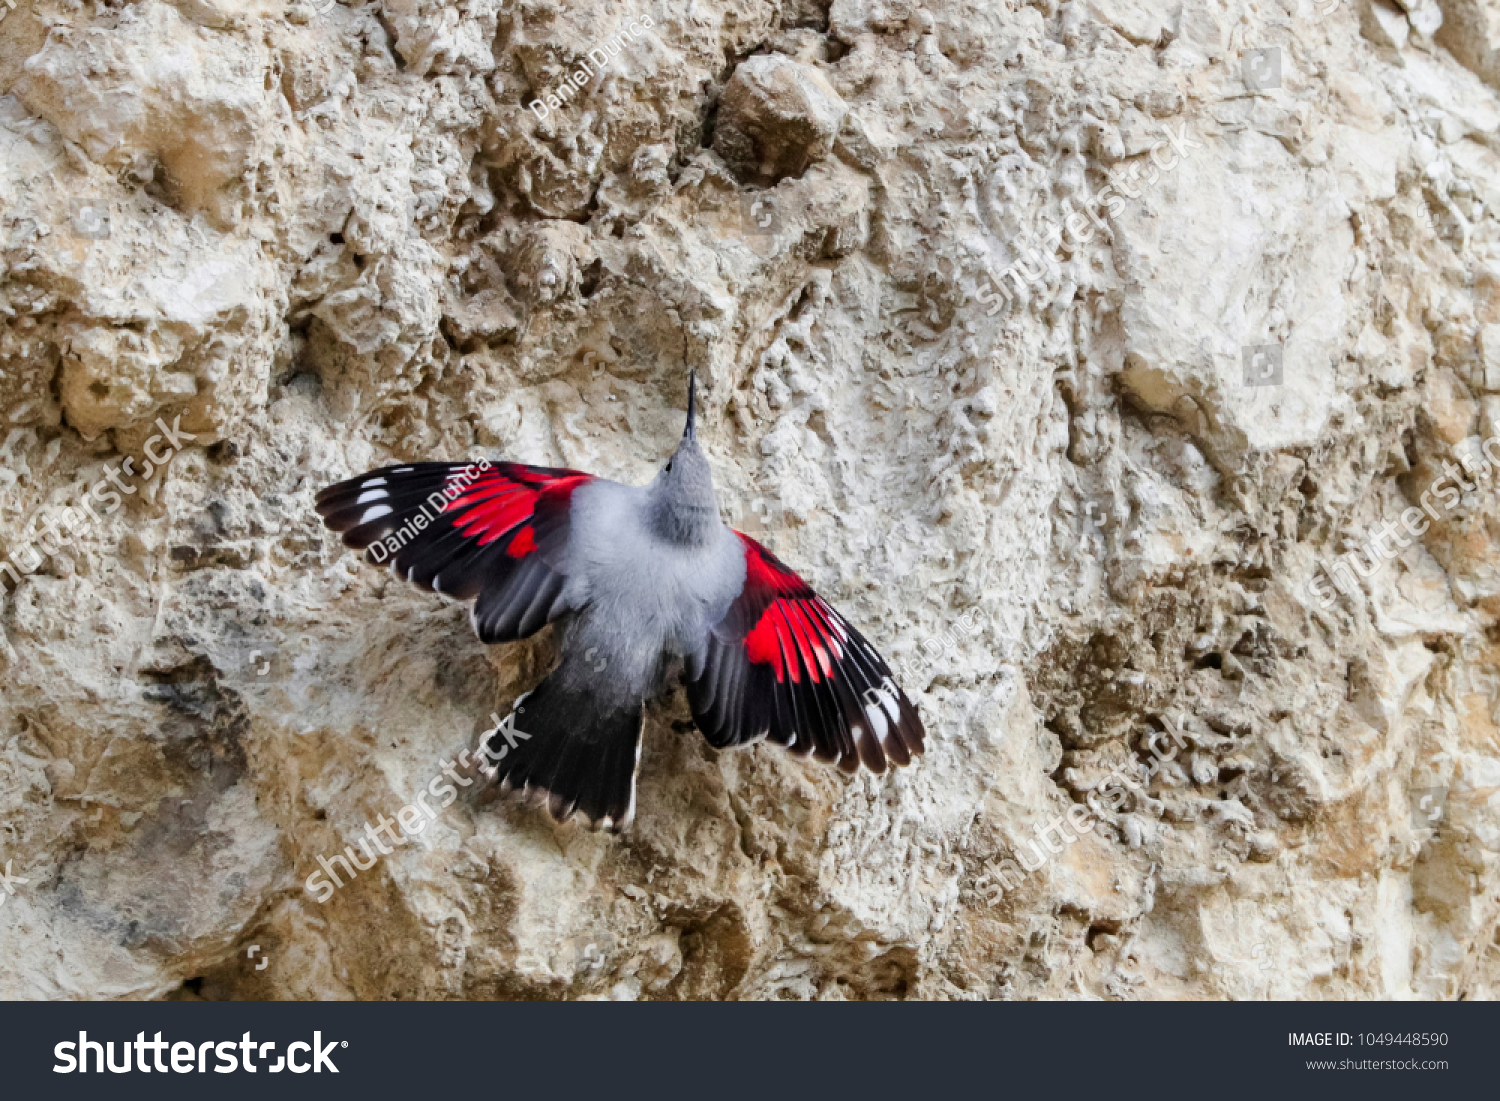 Mountain flying jewel, jumping on a rock looking for beetles and other bugs. Grey bird with red wings. Palava Hills, Czech Republic. Wallcreeper, Tichodroma muraria. #1049448590